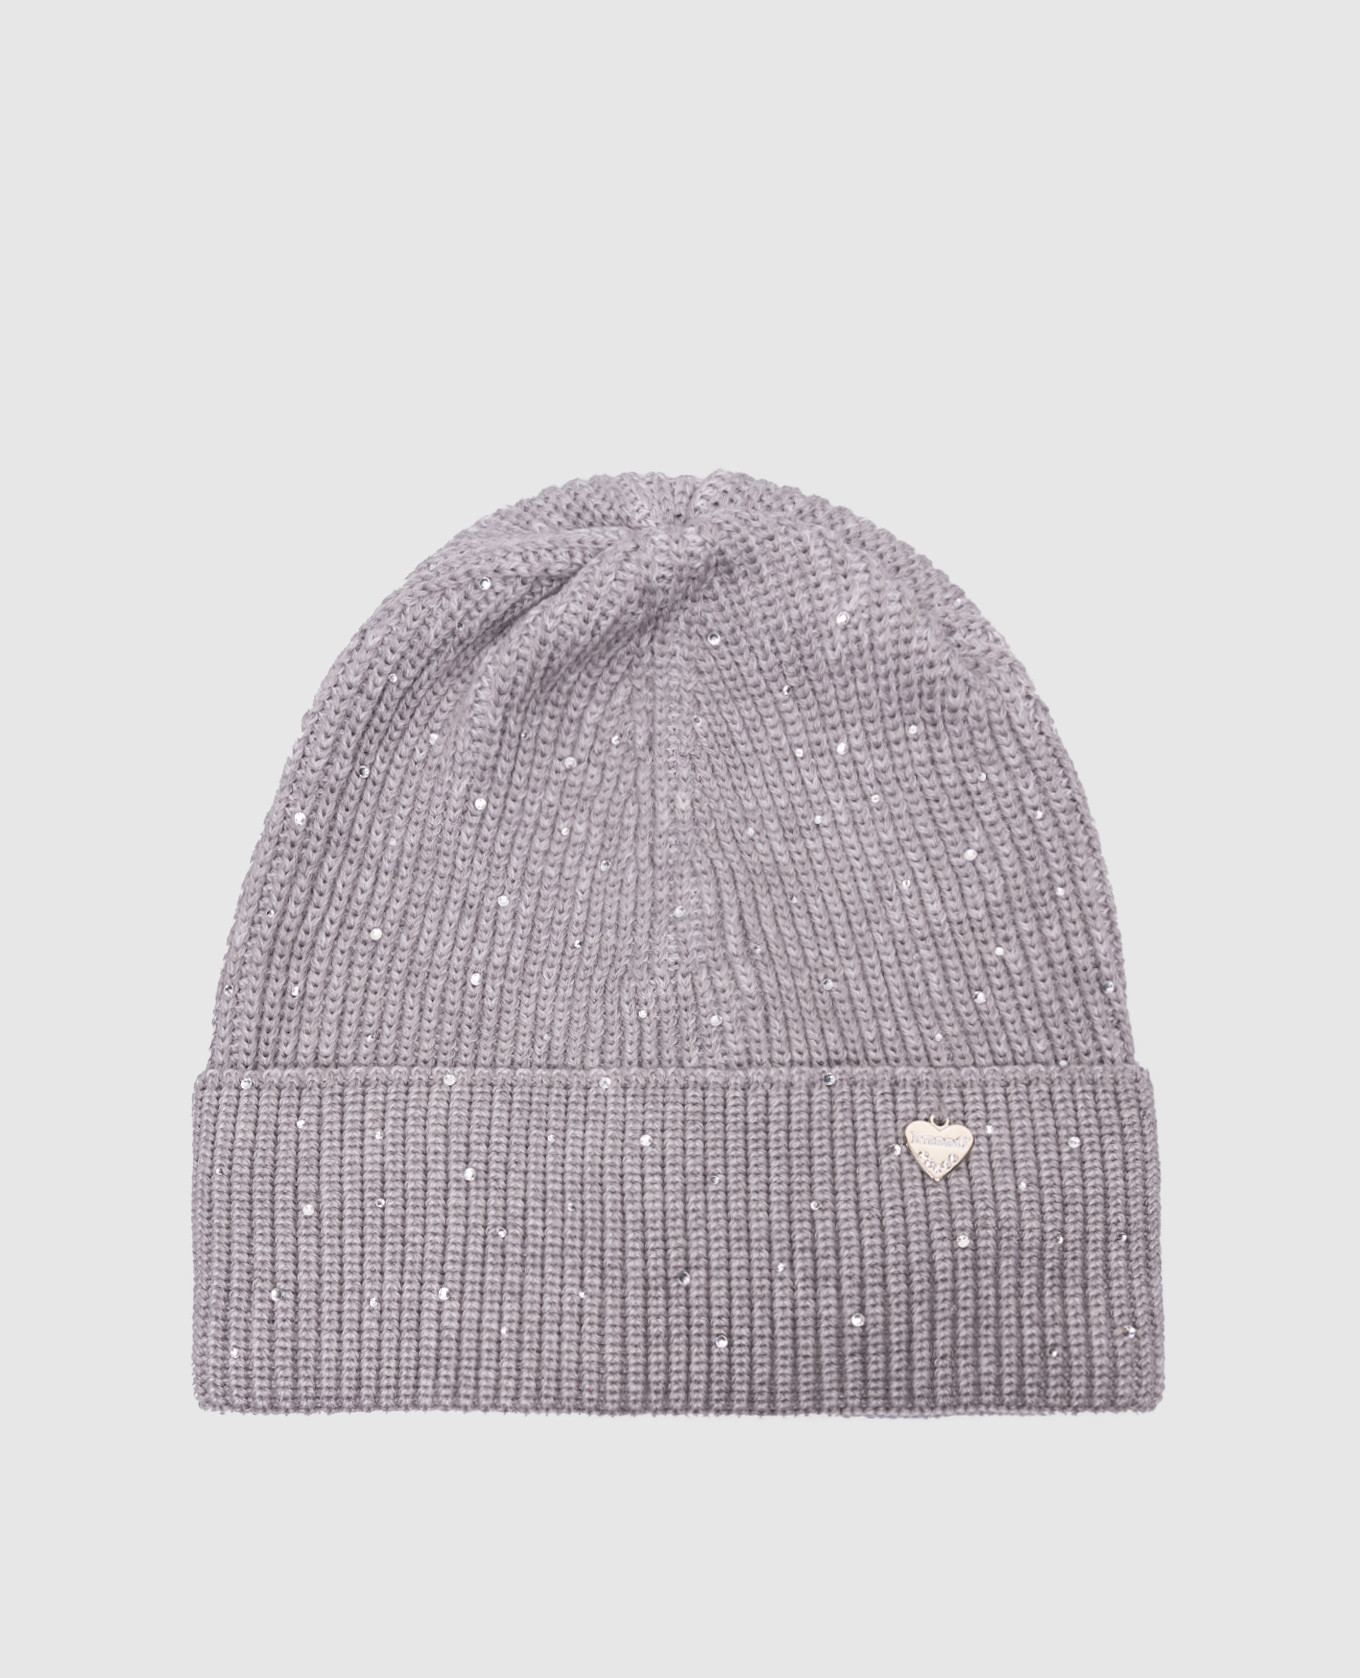 Children's gray hat with crystals